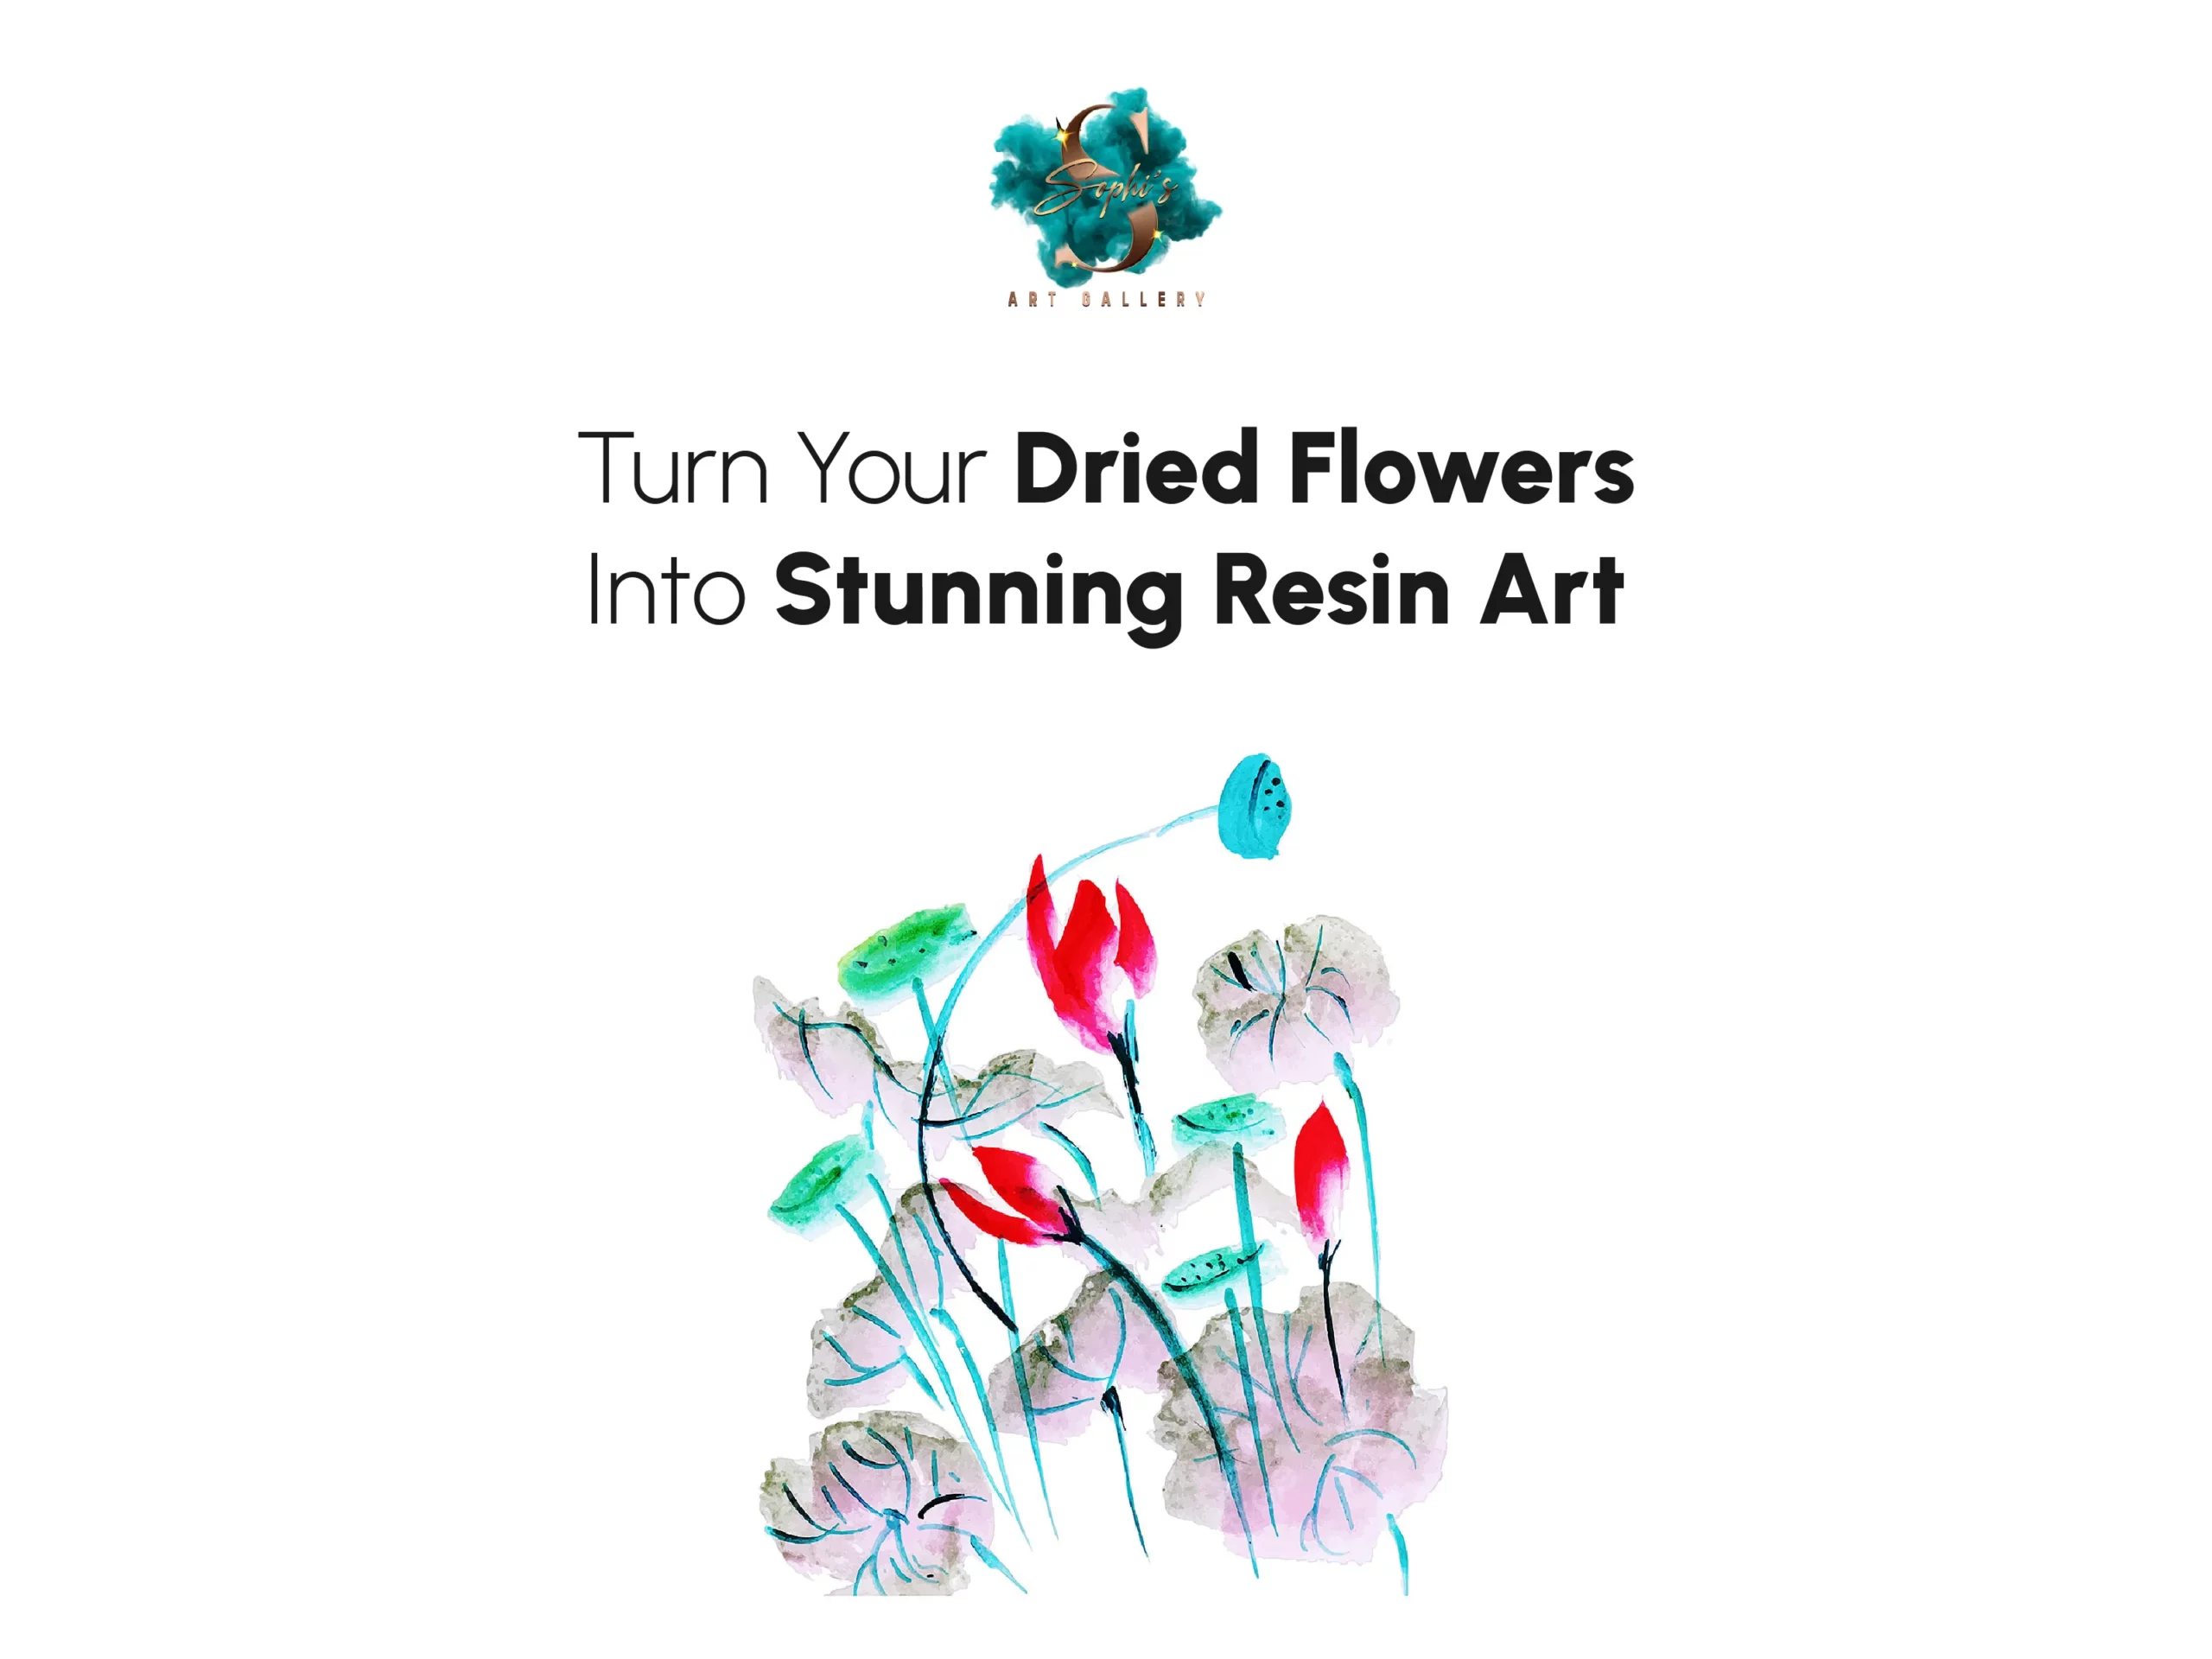 Turn Your Dried Flowers Into Stunning Resin Art